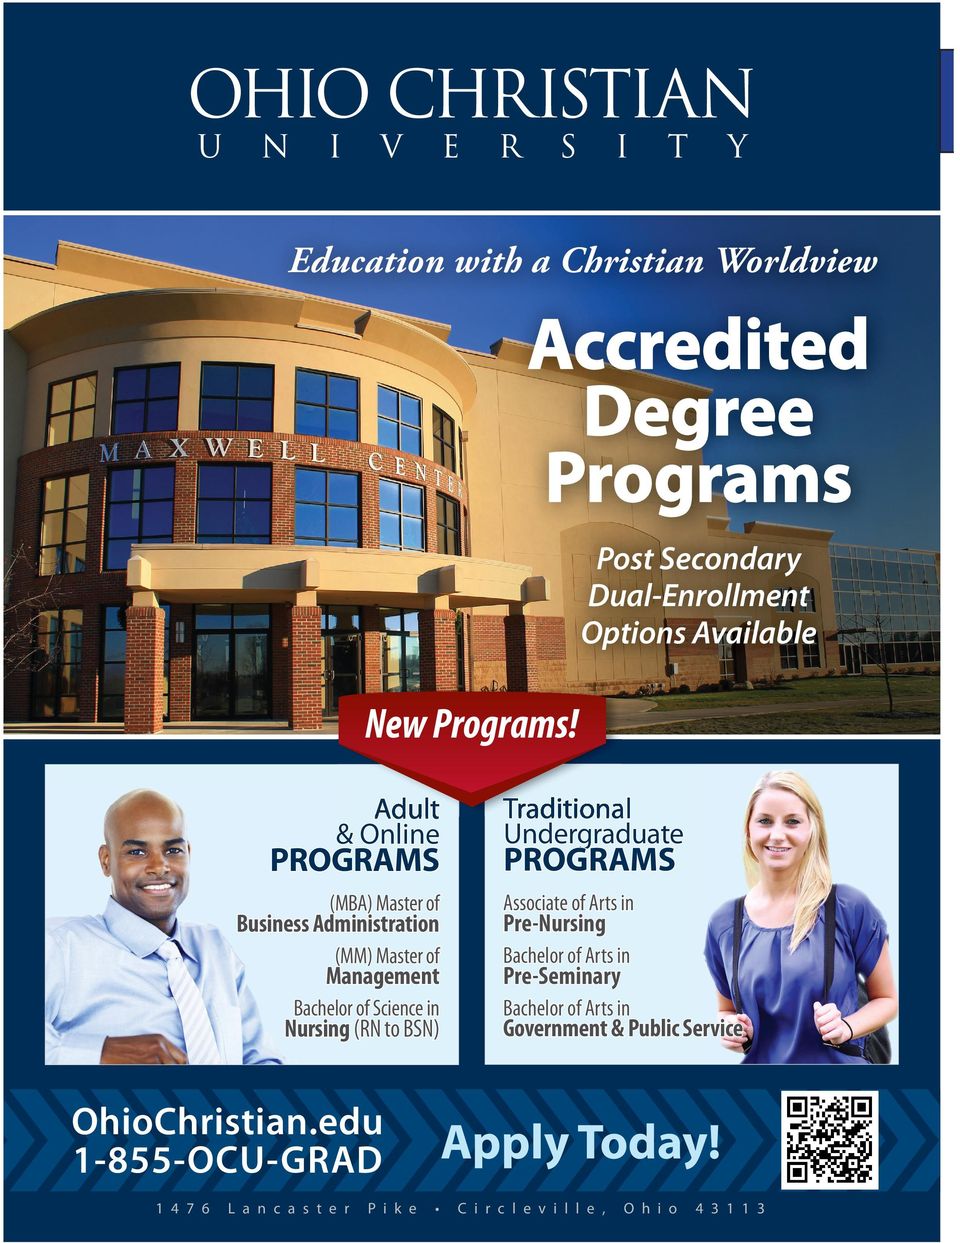 Science in Bachelor of Arts in PROGRAMS Business Administration Management Nursing (RN to BSN) OhioChristian.